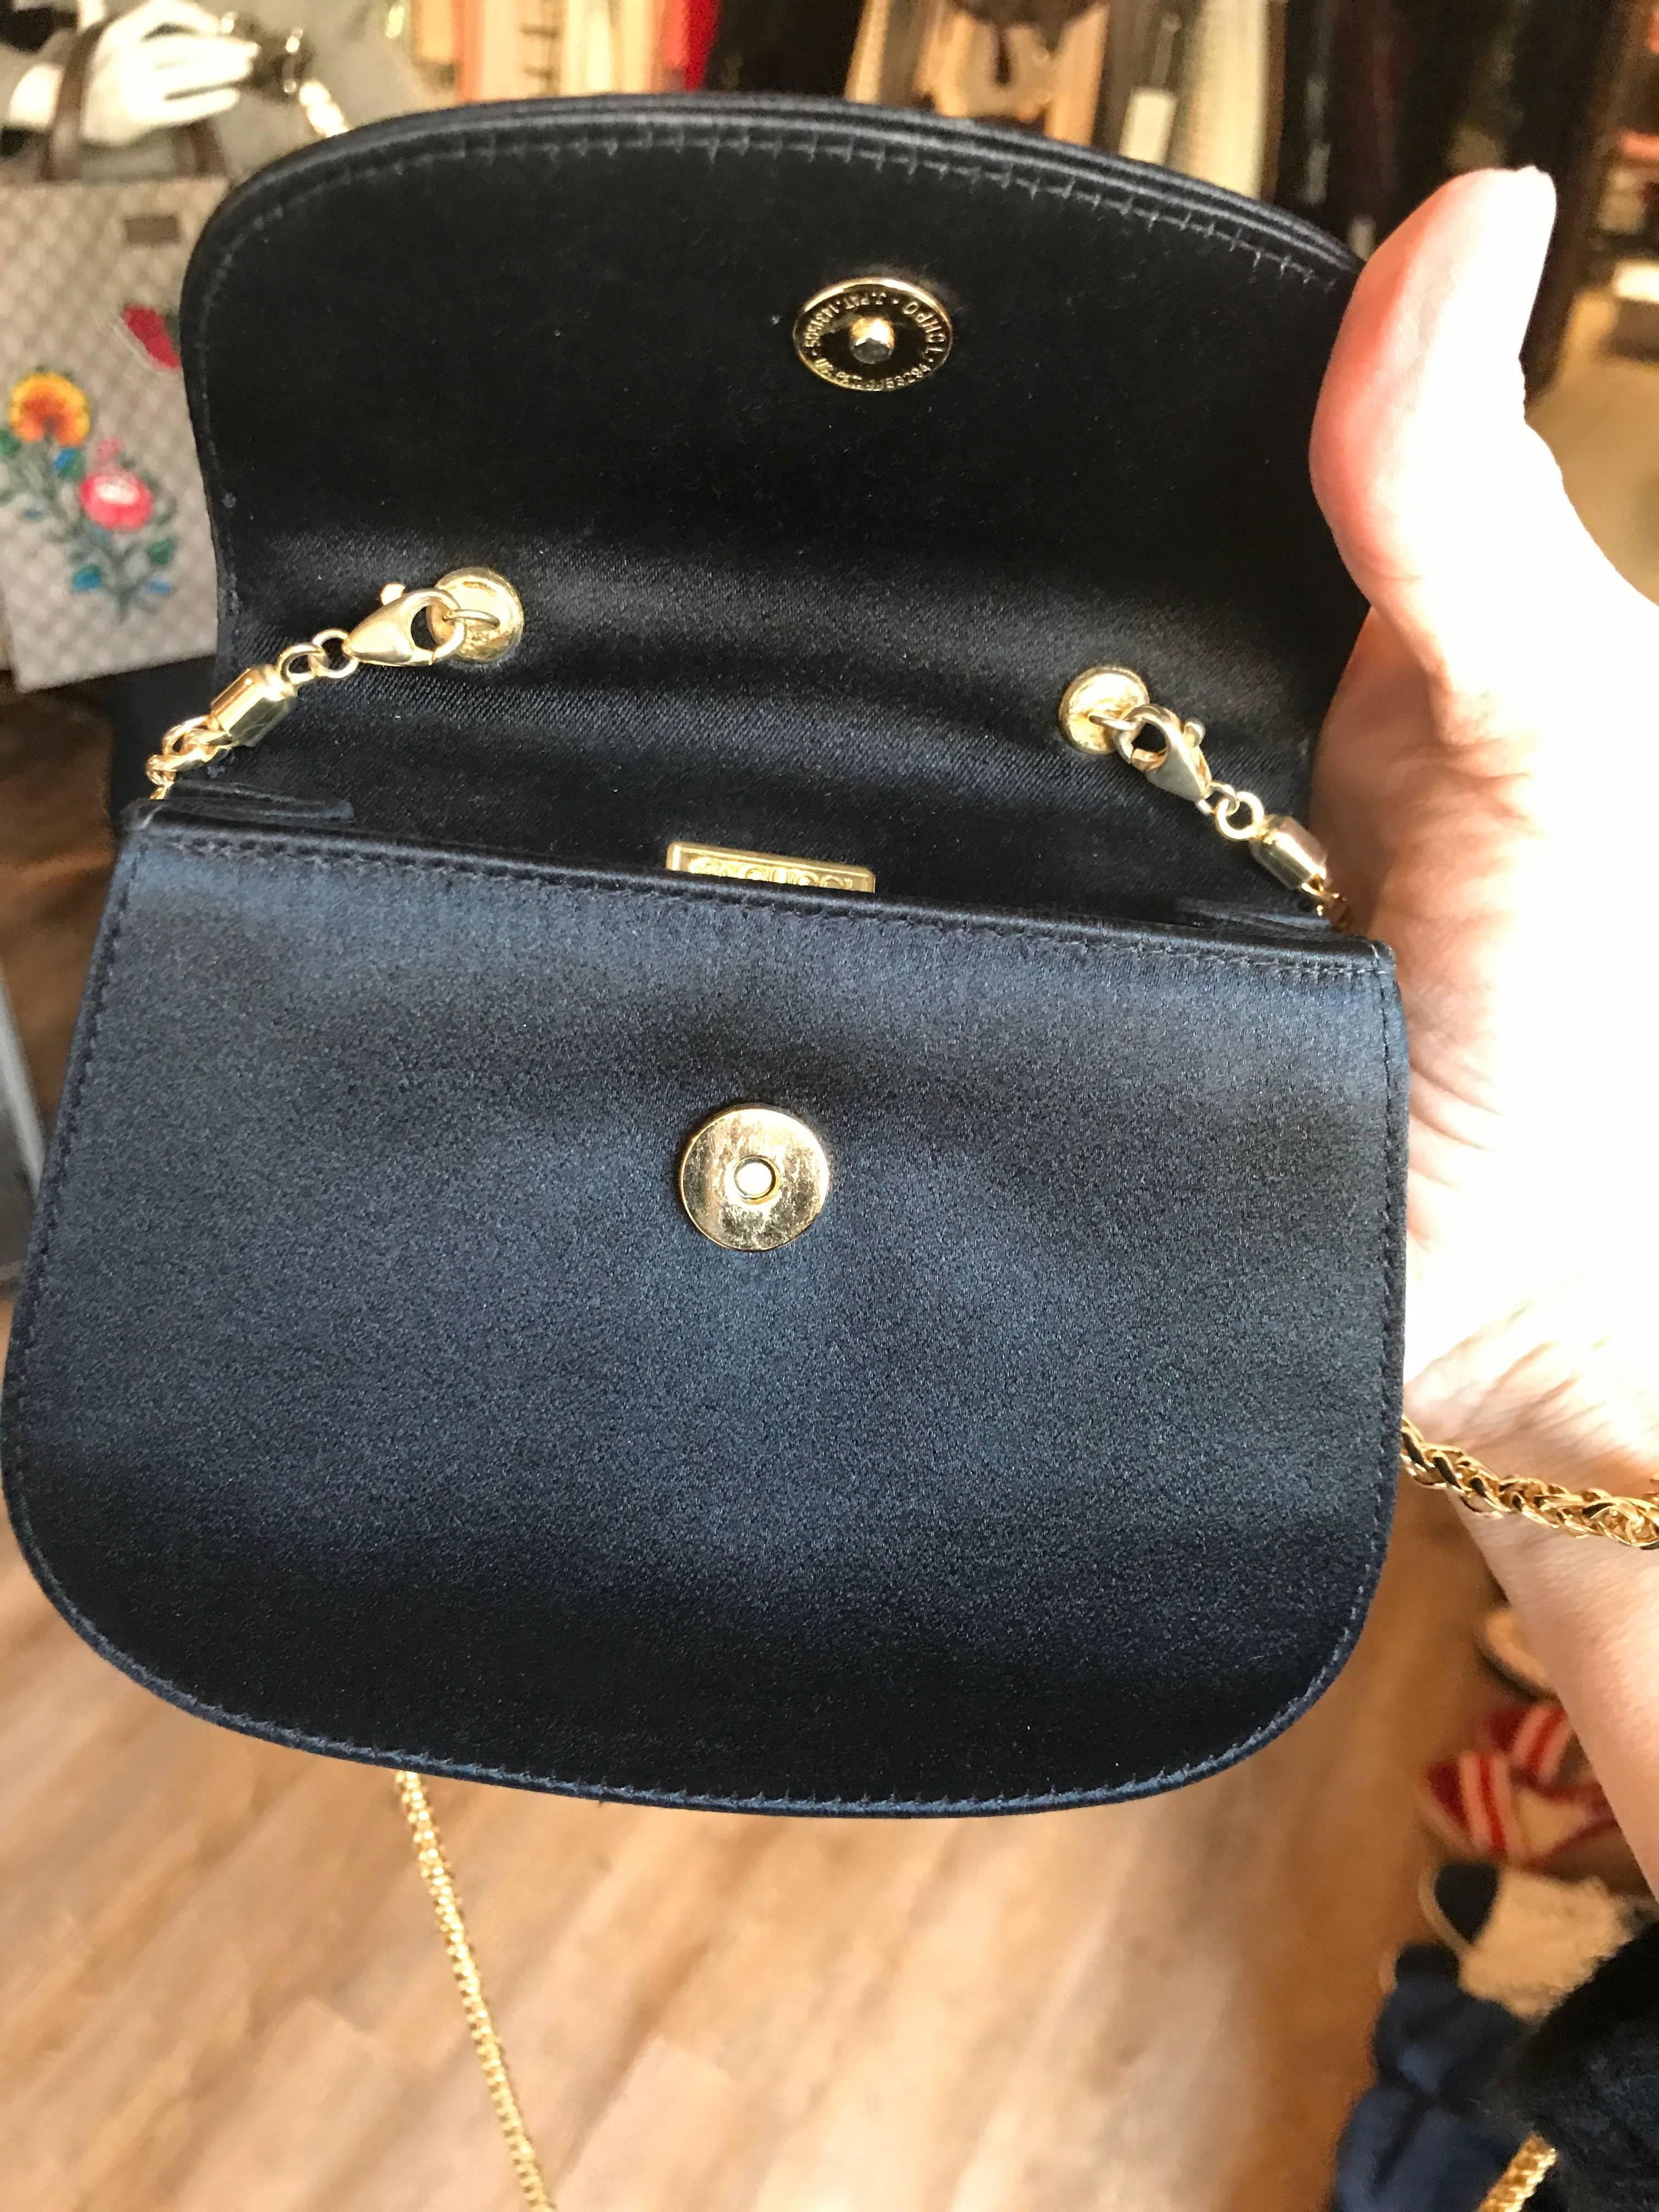 Rare Mini 4 x 5 inch Vintage Gucci bag featured in black satin with a bamboo handle and long gold chain. Bag has a snap closure and an optional gold chain that is long enough to make this a necklace or cross body shoulder bag. Fully lined in satin